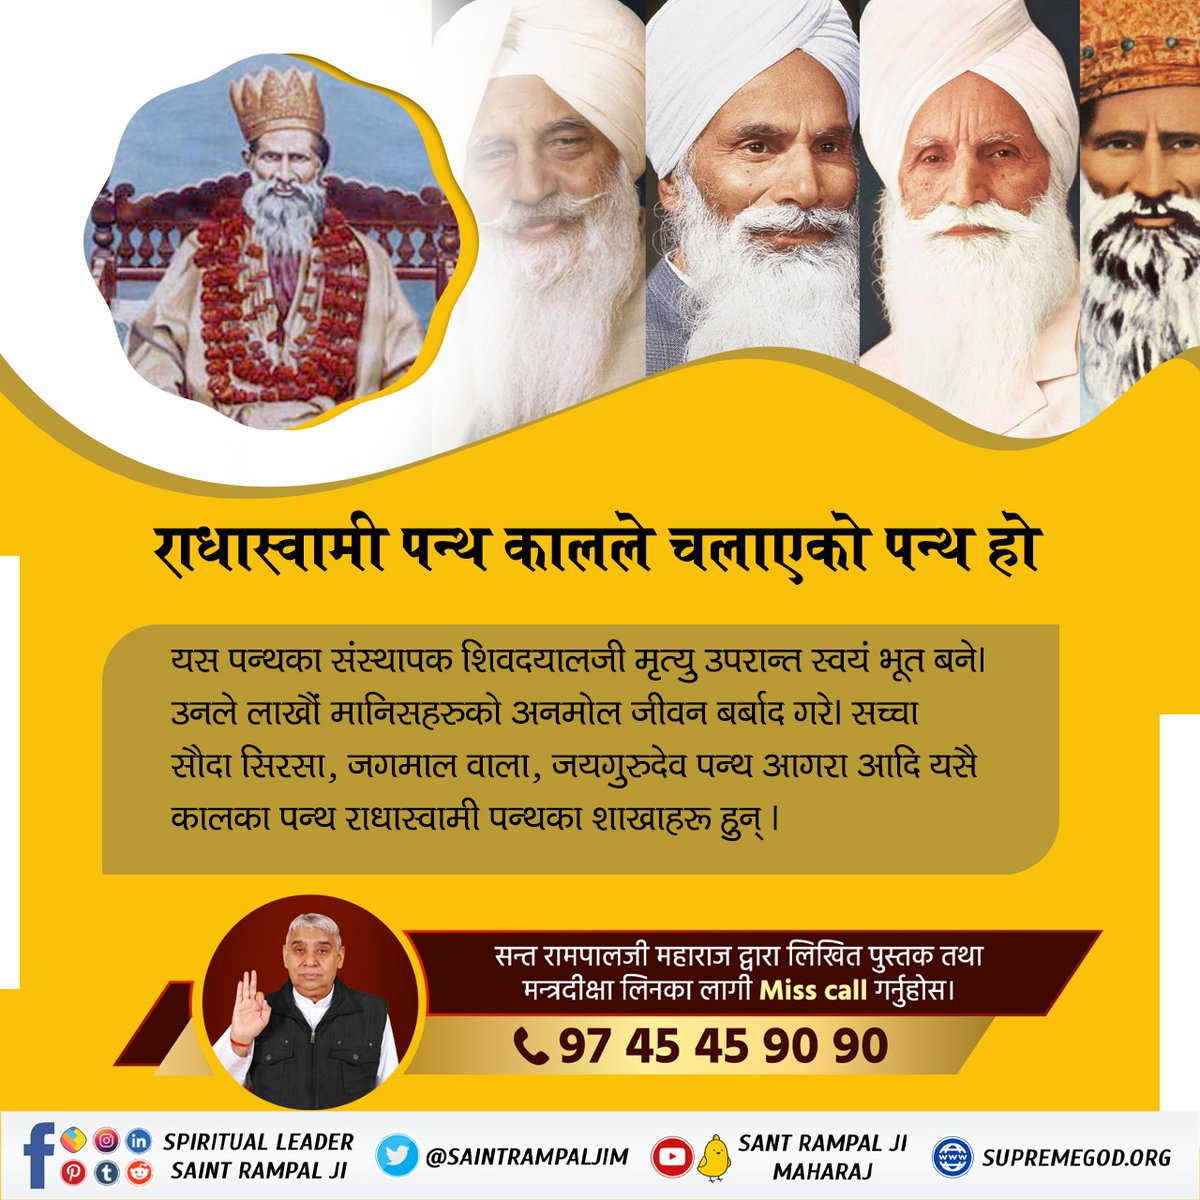 #राधास्वामी_पन्थको_सत्यता Shivdayalji, the founder of this sect,became a ghost after his death. He ruined the precious lives of millions of people. Sacha Sauda Sirsa, Jagmal Wala,Jayagurudev Panth Agra etc. are branches of the Radhaswami Panth, a sect of this period.